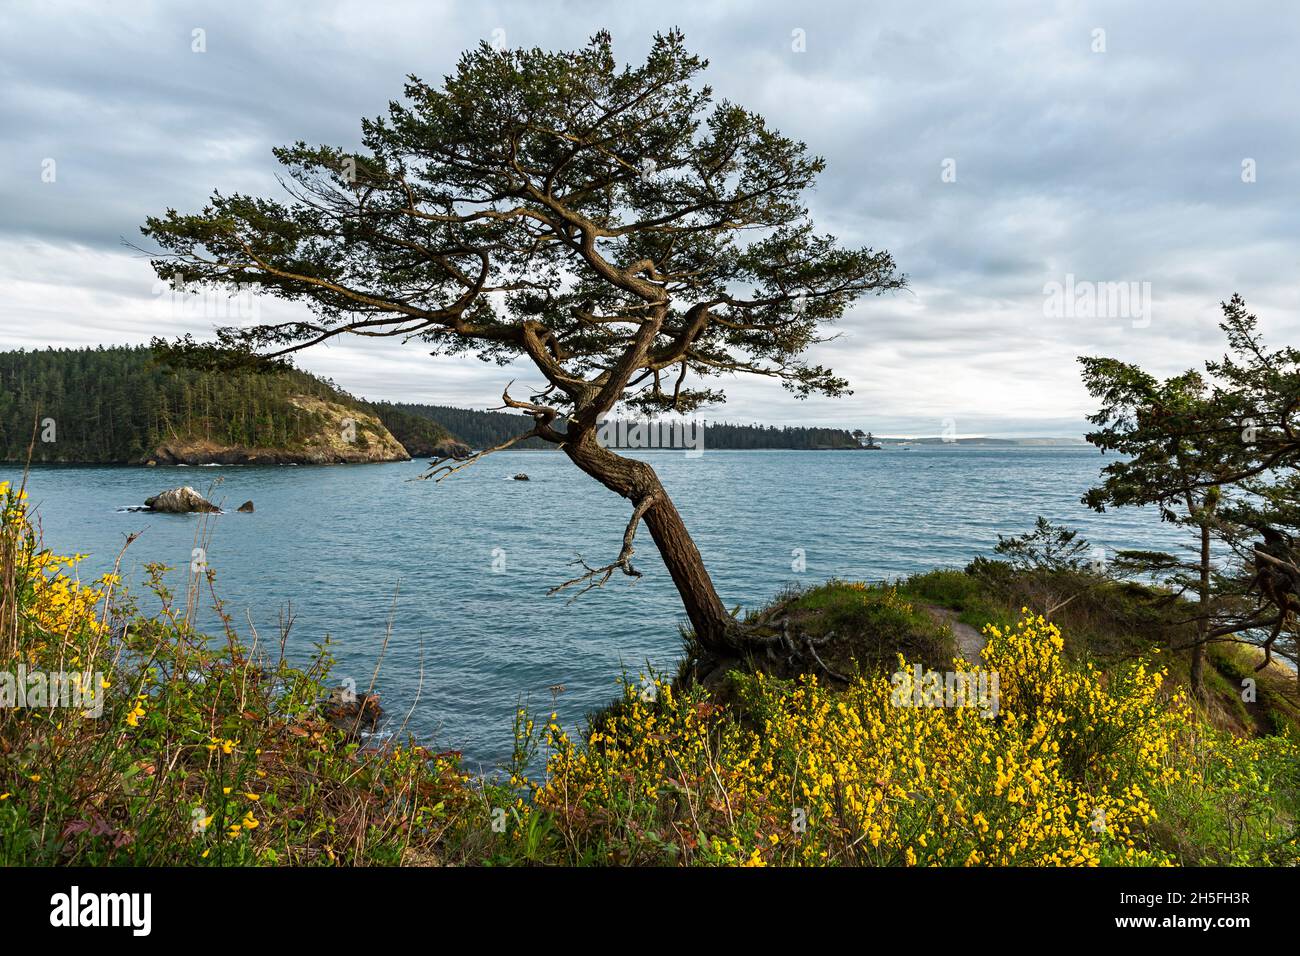 WA19739-00...WASHINGTON - A wind sculptured tree surrounded by scotch broom overlooking Bowman Bay in Deception Pass State Park. Stock Photo